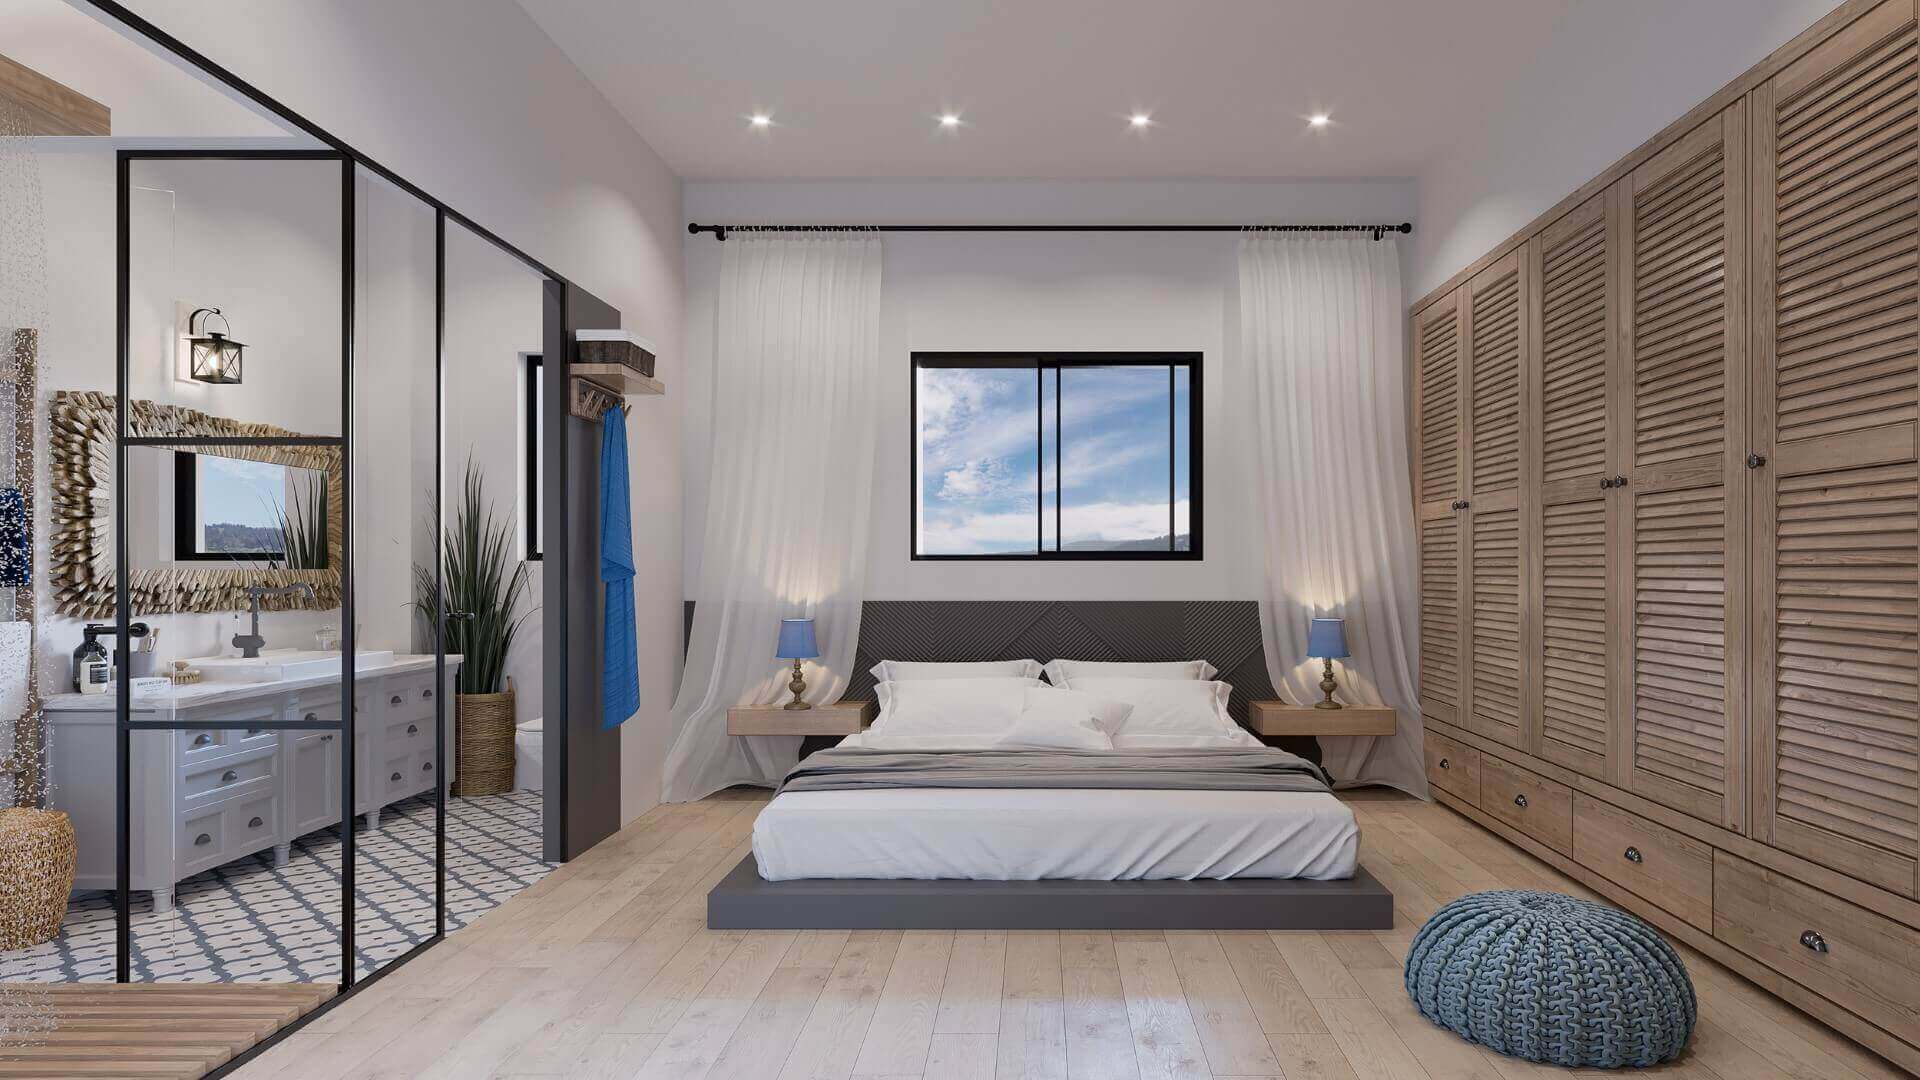 Simulation of a bedroom space in the UNIK&MORE project in Kneam